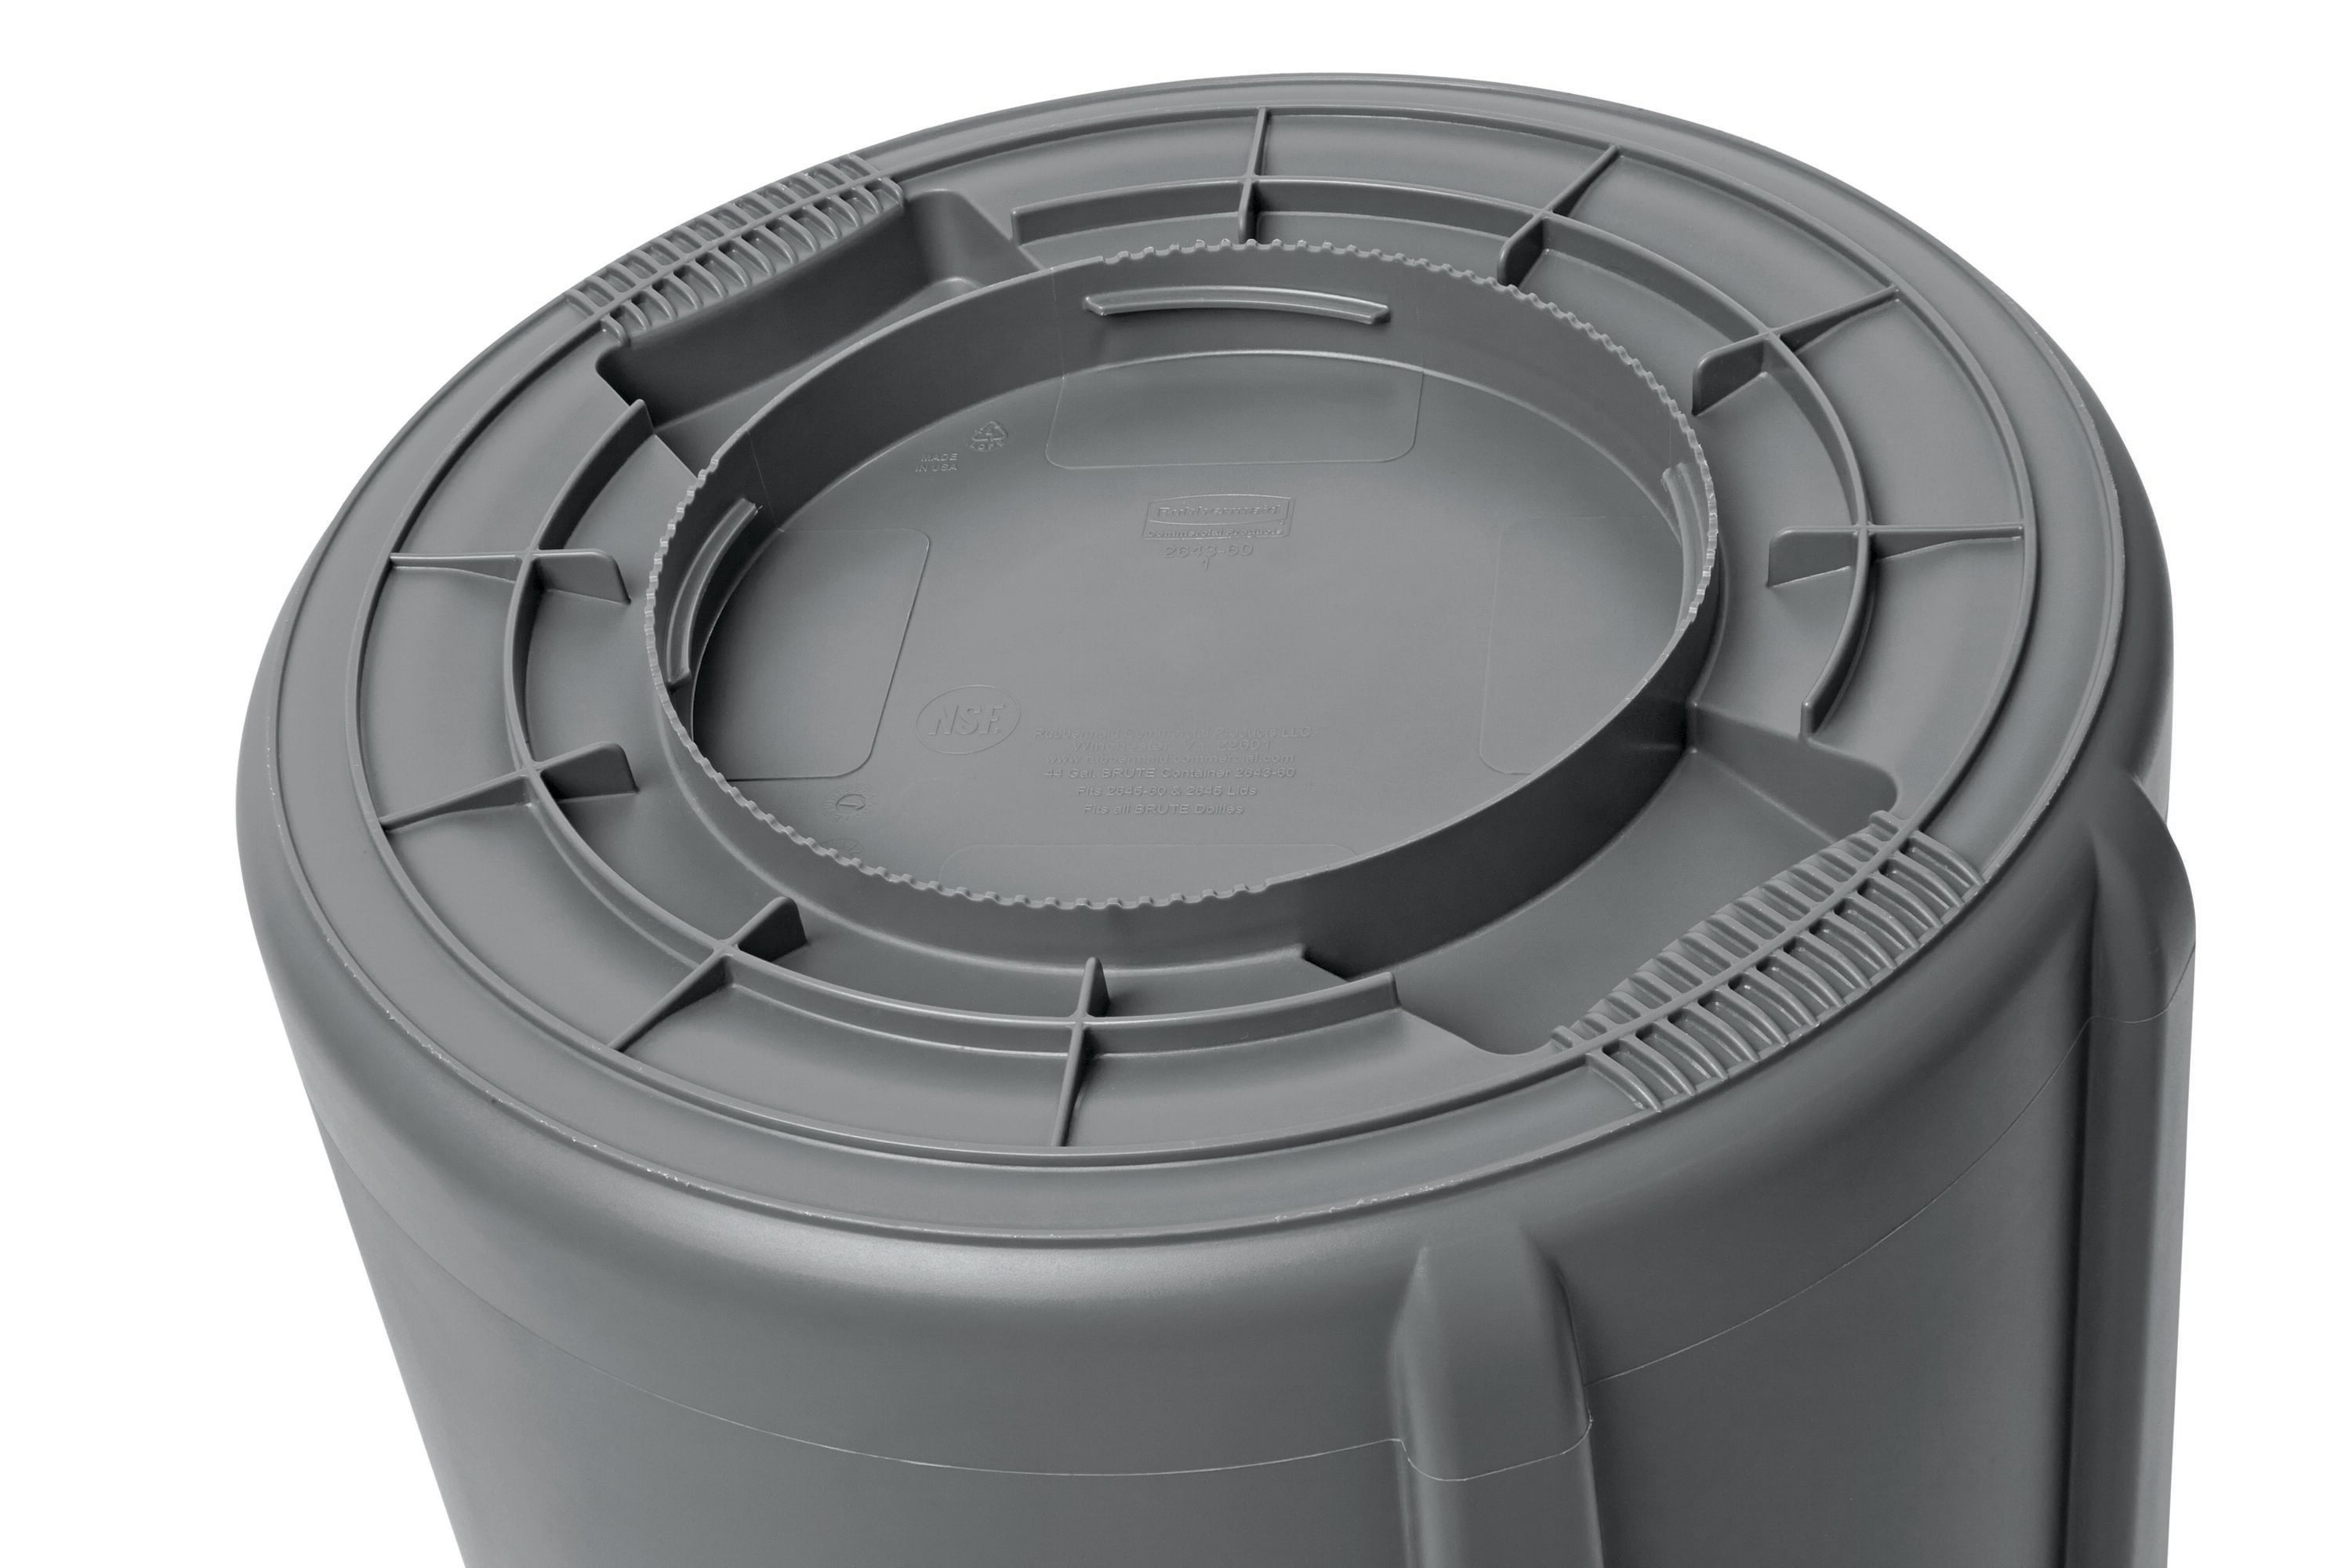 Brute 44 Gal. Grey Round Vented Wheeled Trash Can